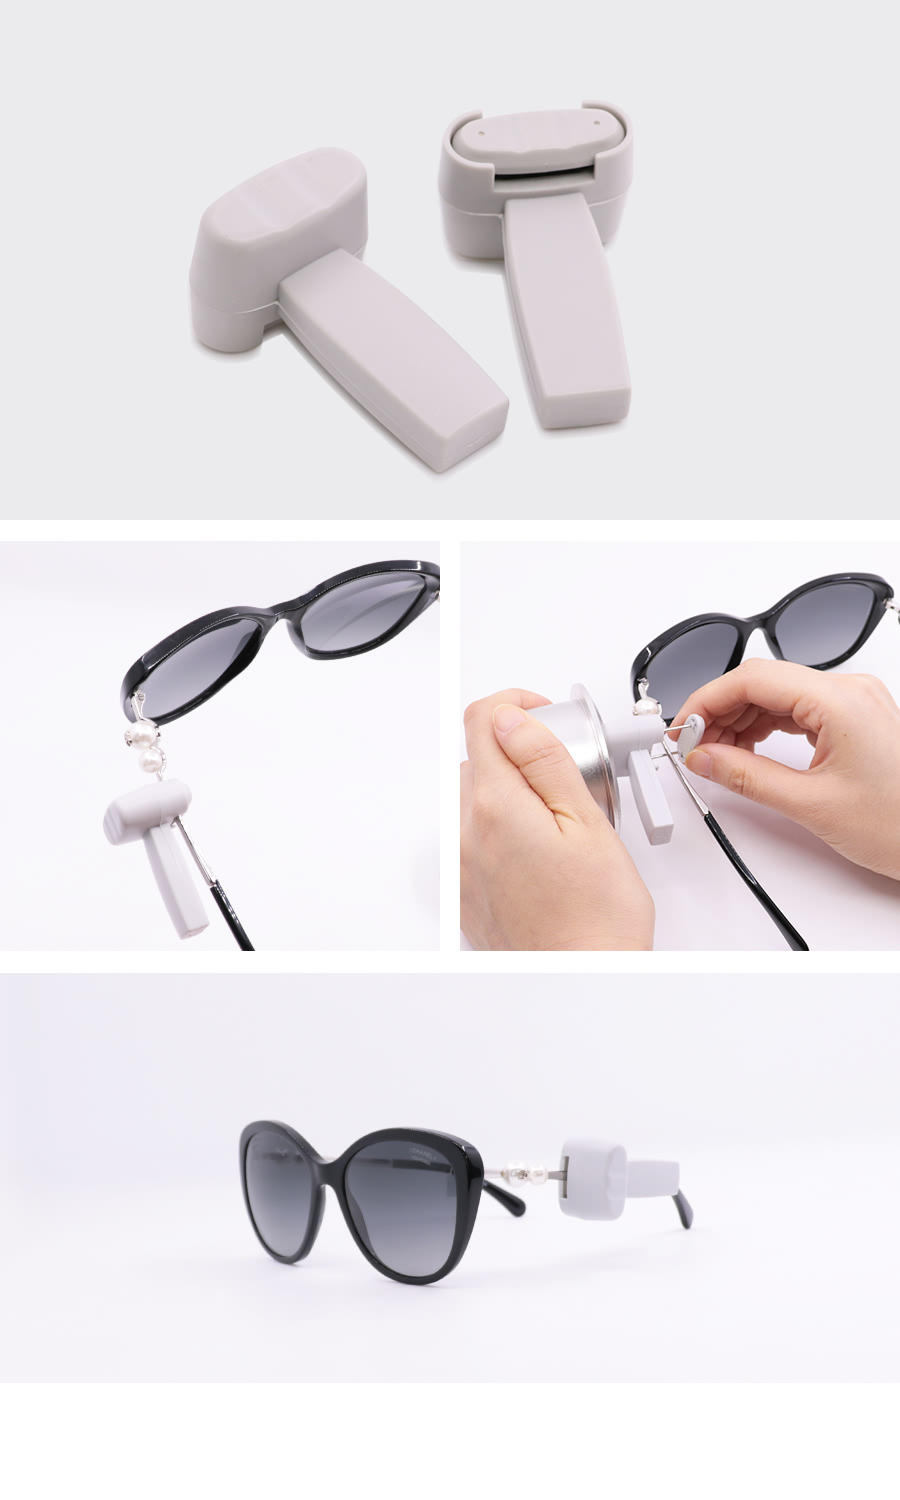 Eye-glasses Security Tag